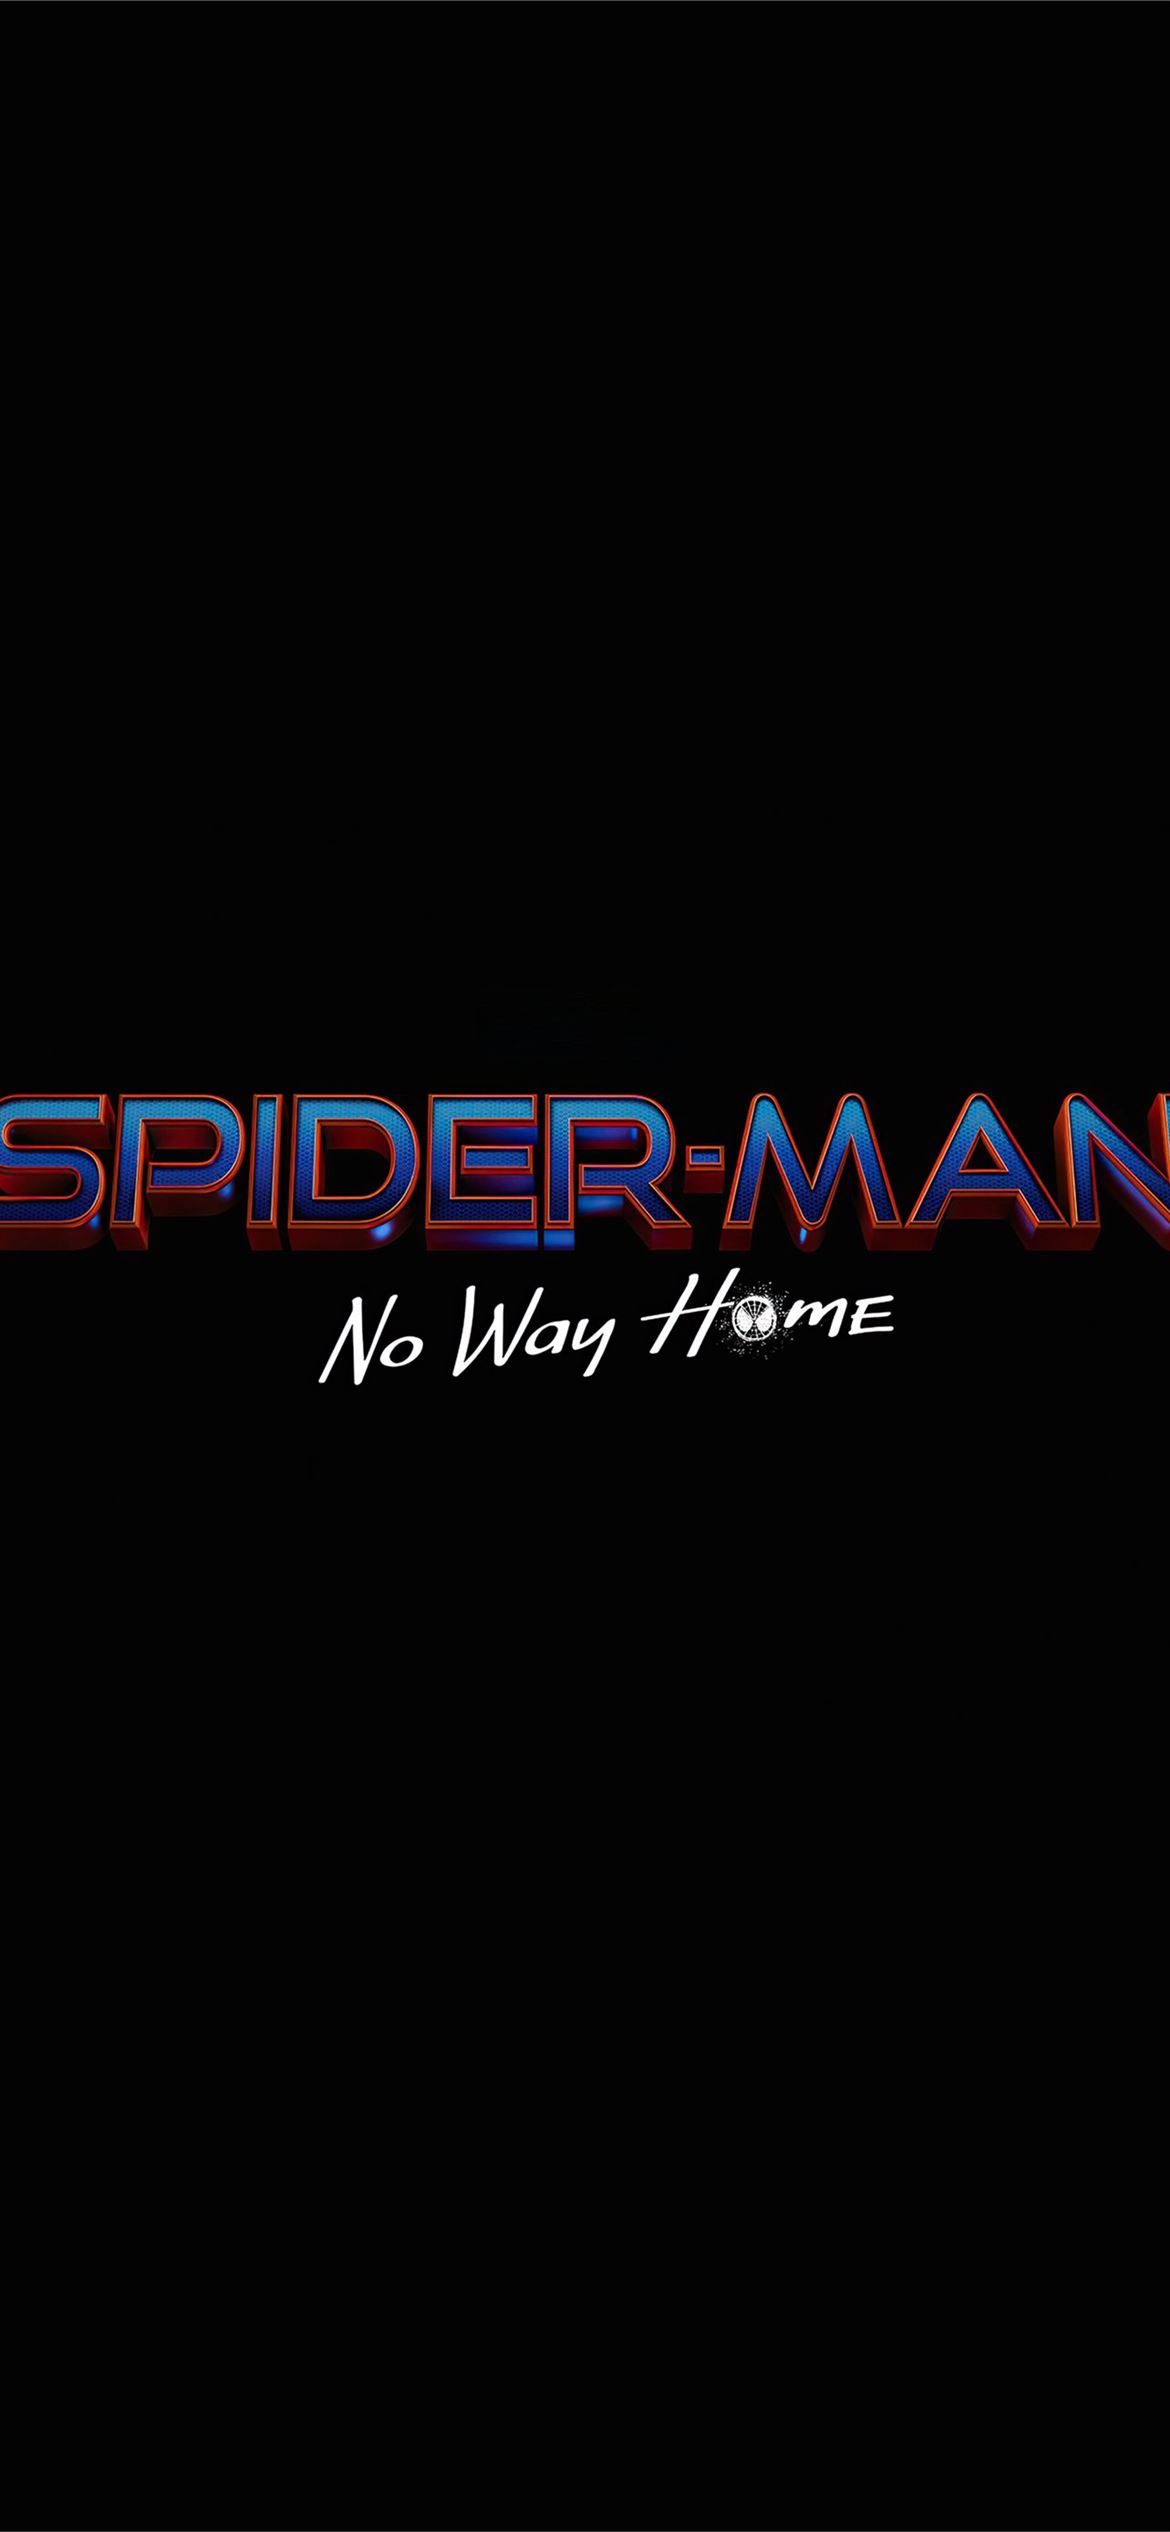 1080x1920 Spiderman No Way Home Movie Poster 5k Iphone 7,6s,6 Plus